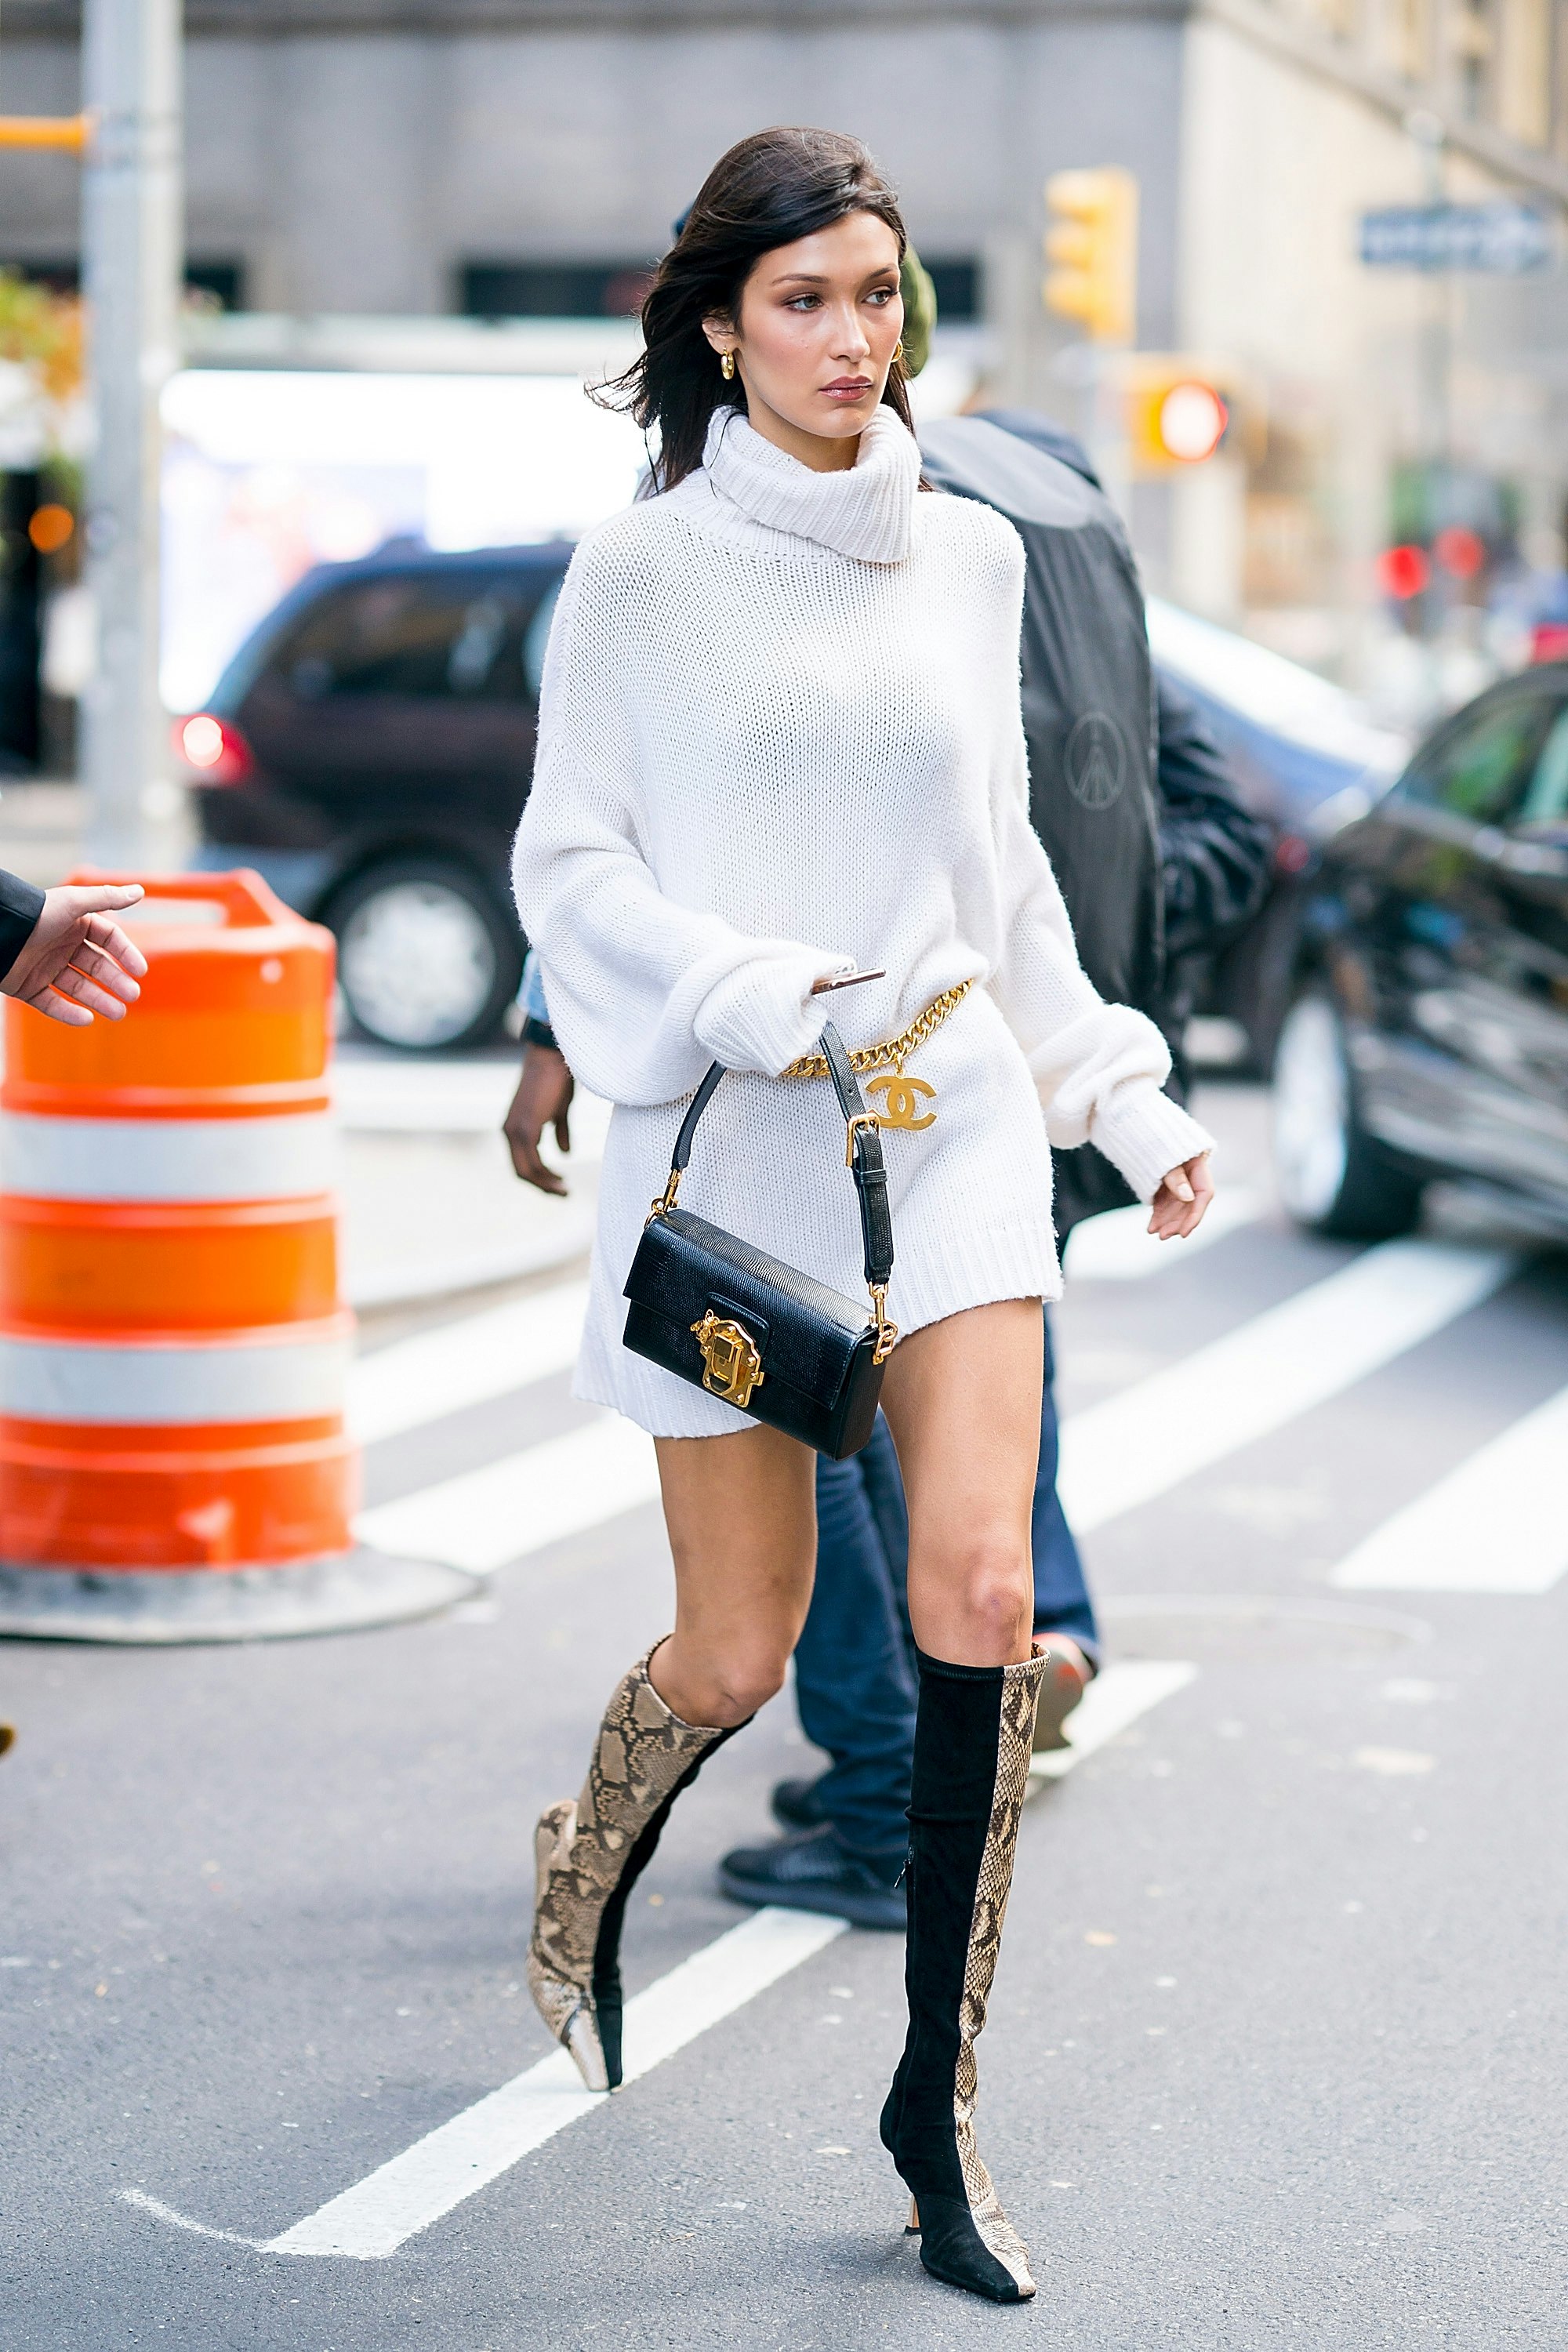 Bella Hadid's Snakeskin Boots Are An 